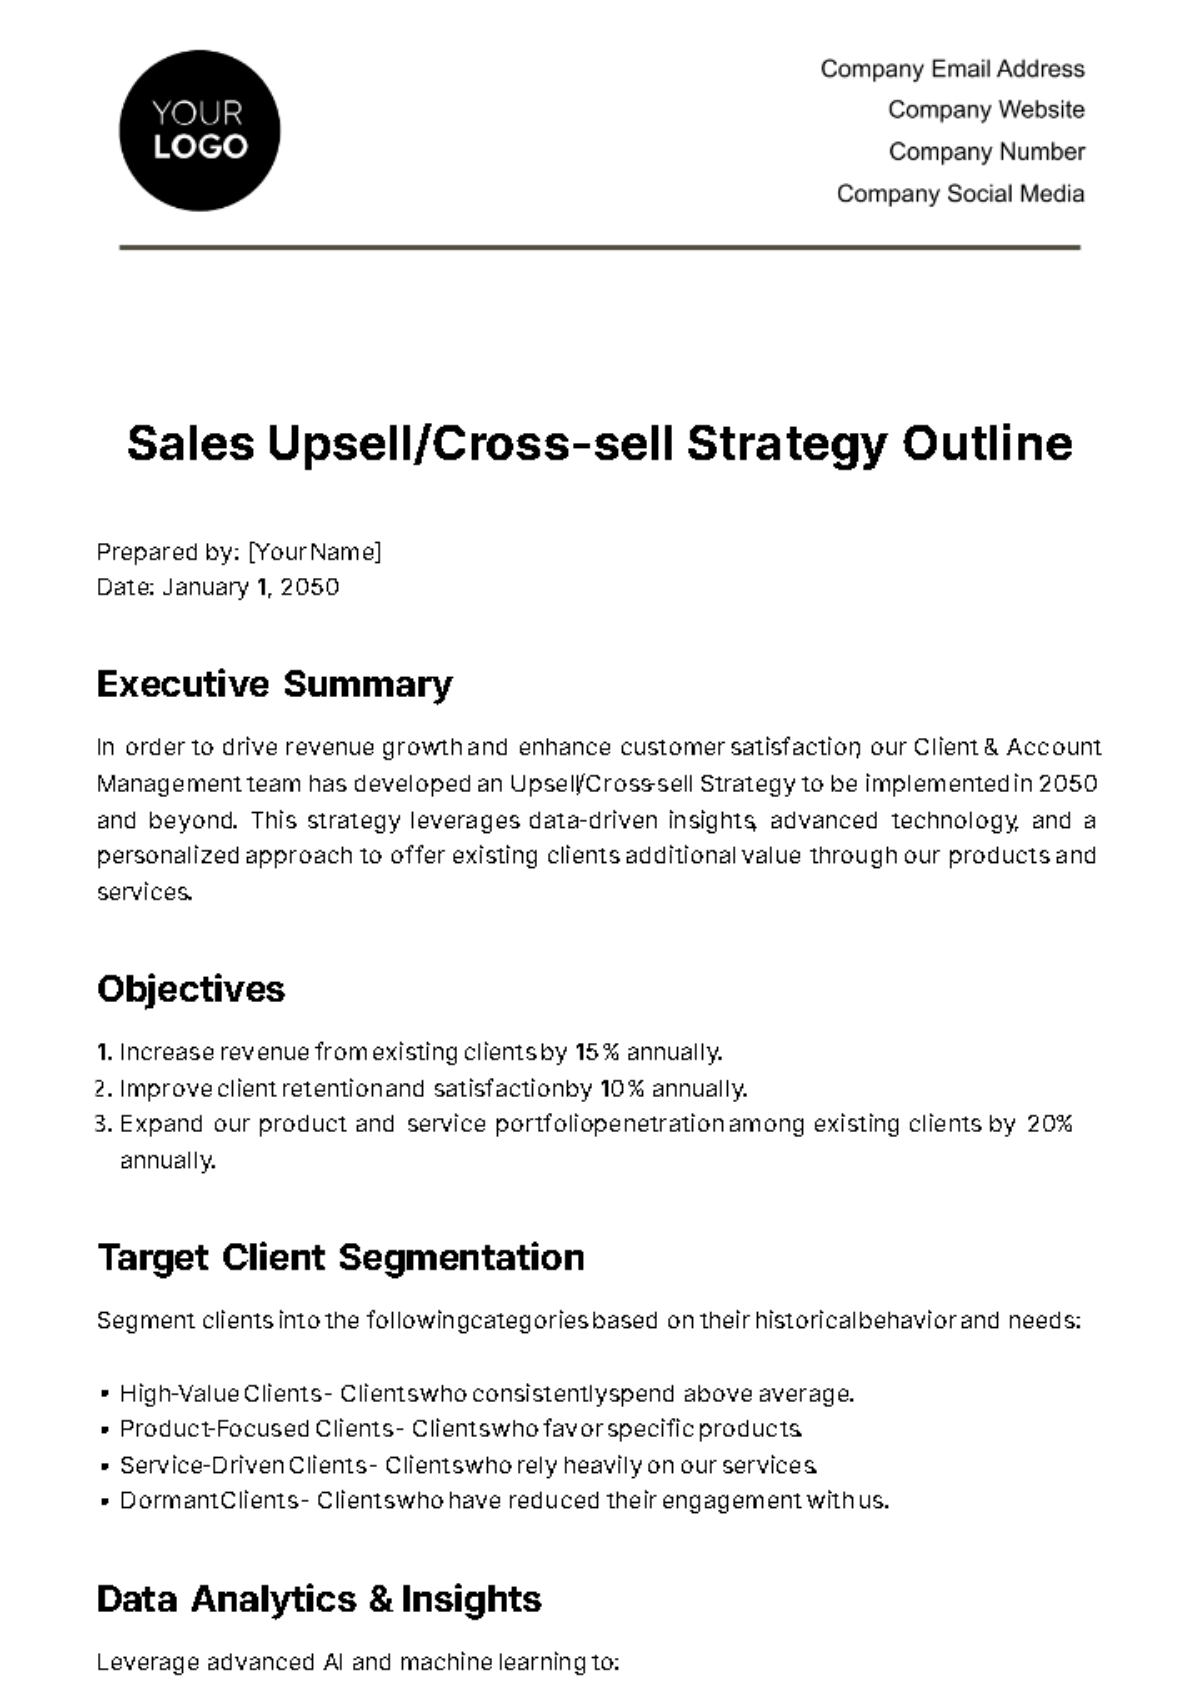 Free Sales Upsell/Cross-sell Strategy Outline Template